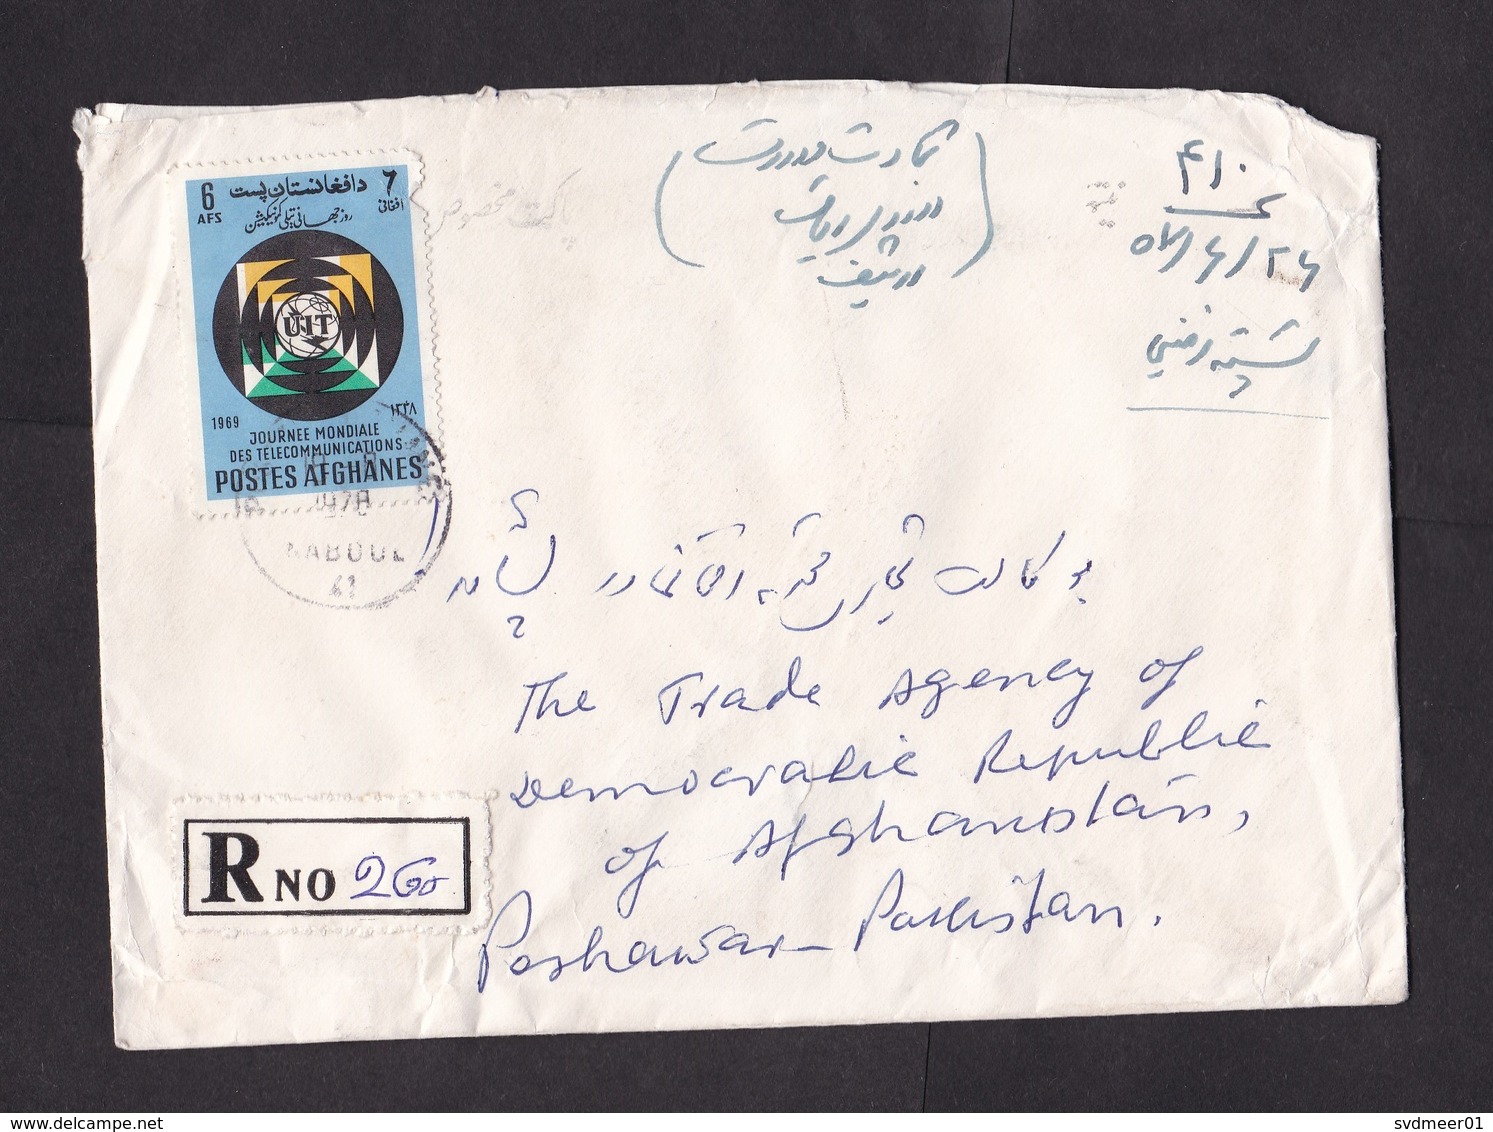 Afghanistan: Registered Cover To Pakistan 1978, 6 Stamps, Telecommunications Union ITU, R-label, Rare Real Use (damaged) - Afghanistan